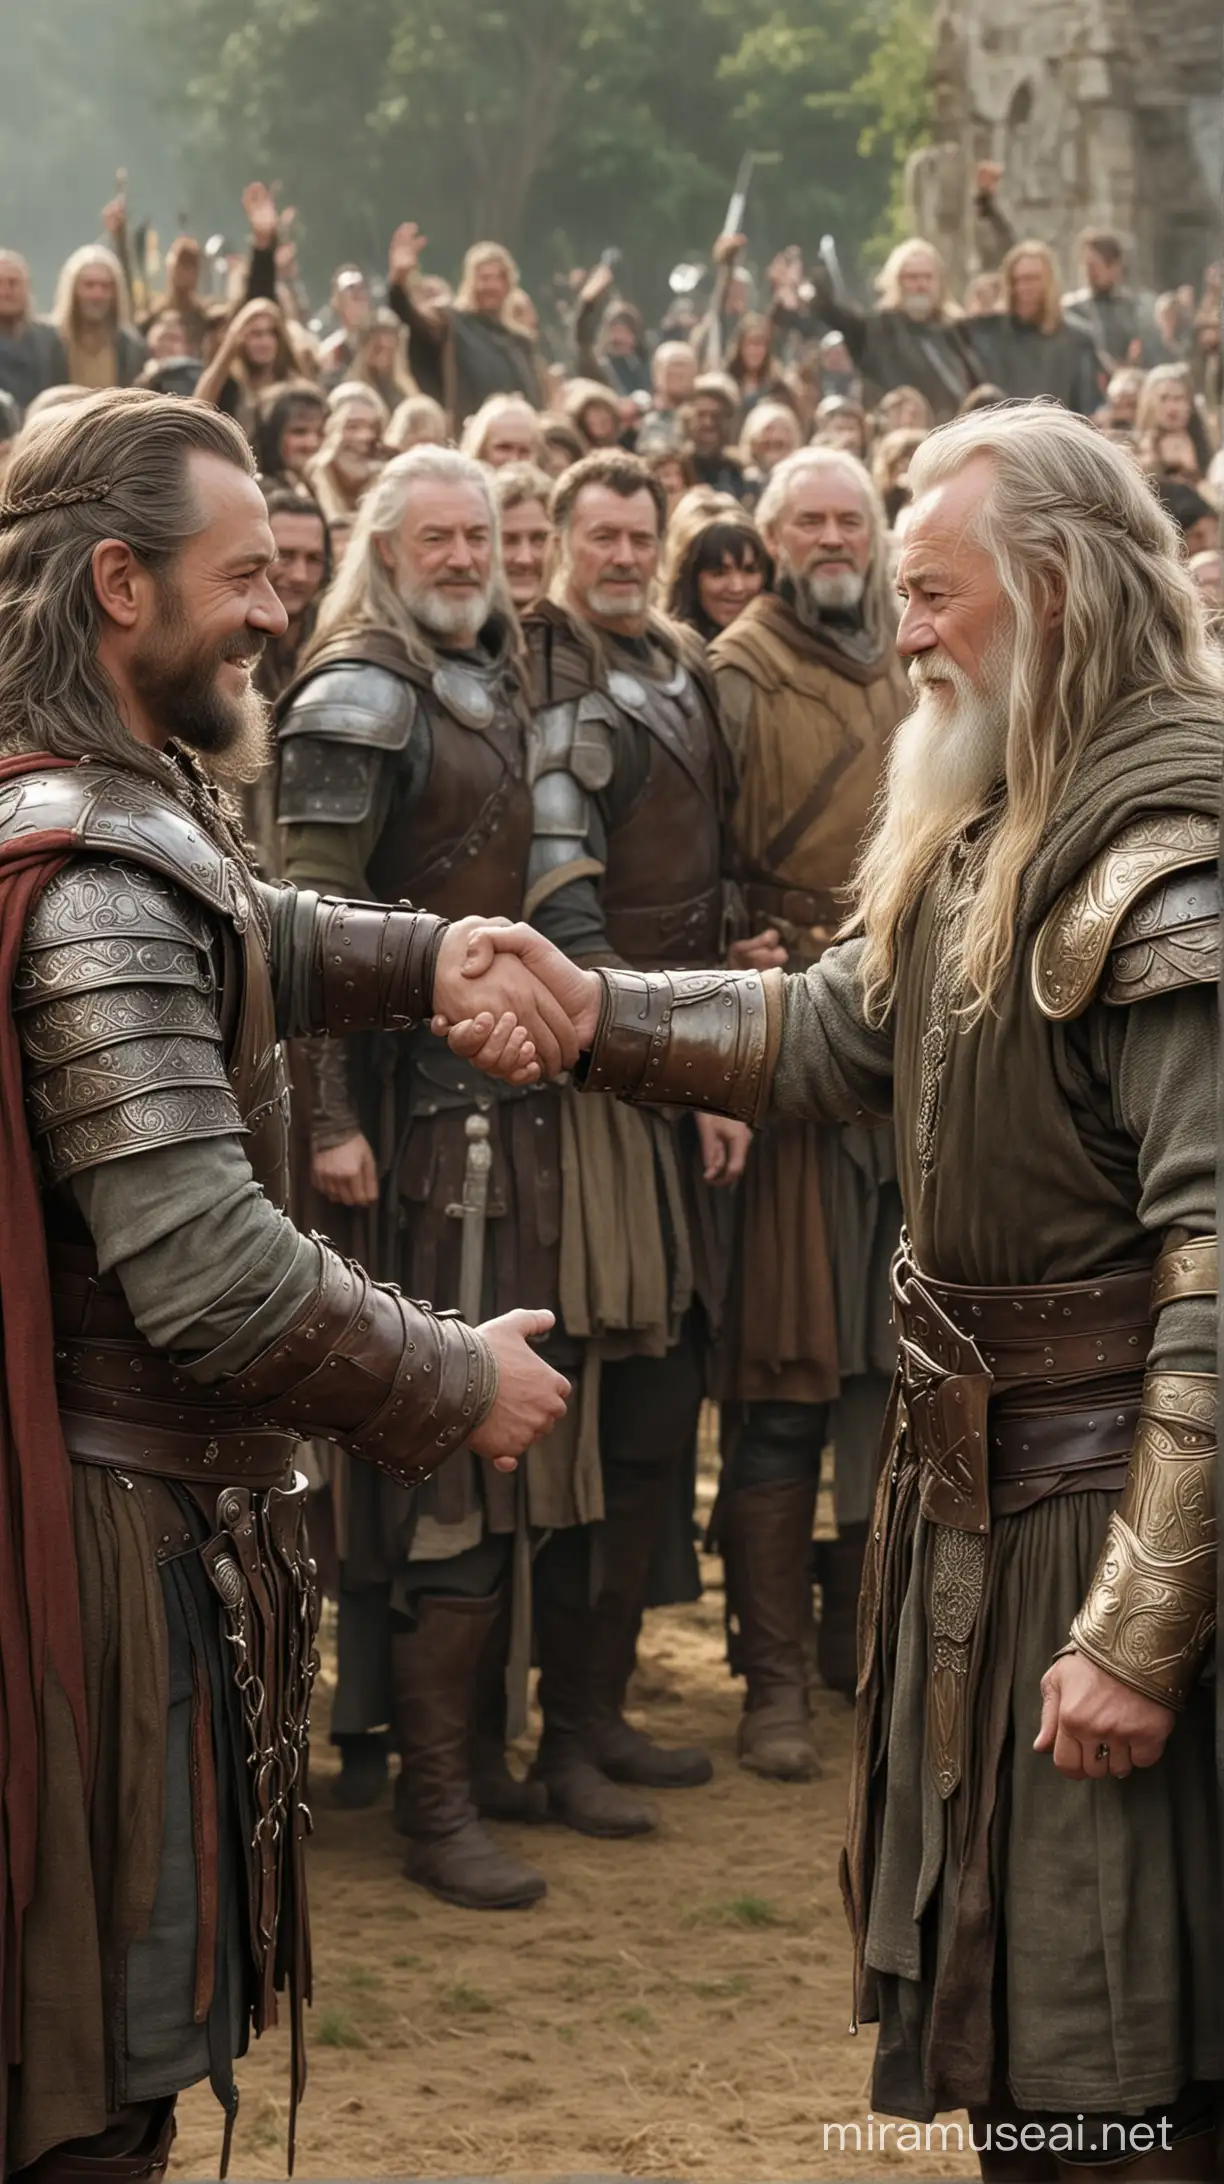 Caesar shaking hands with King Theoden, with people cheering in the background.